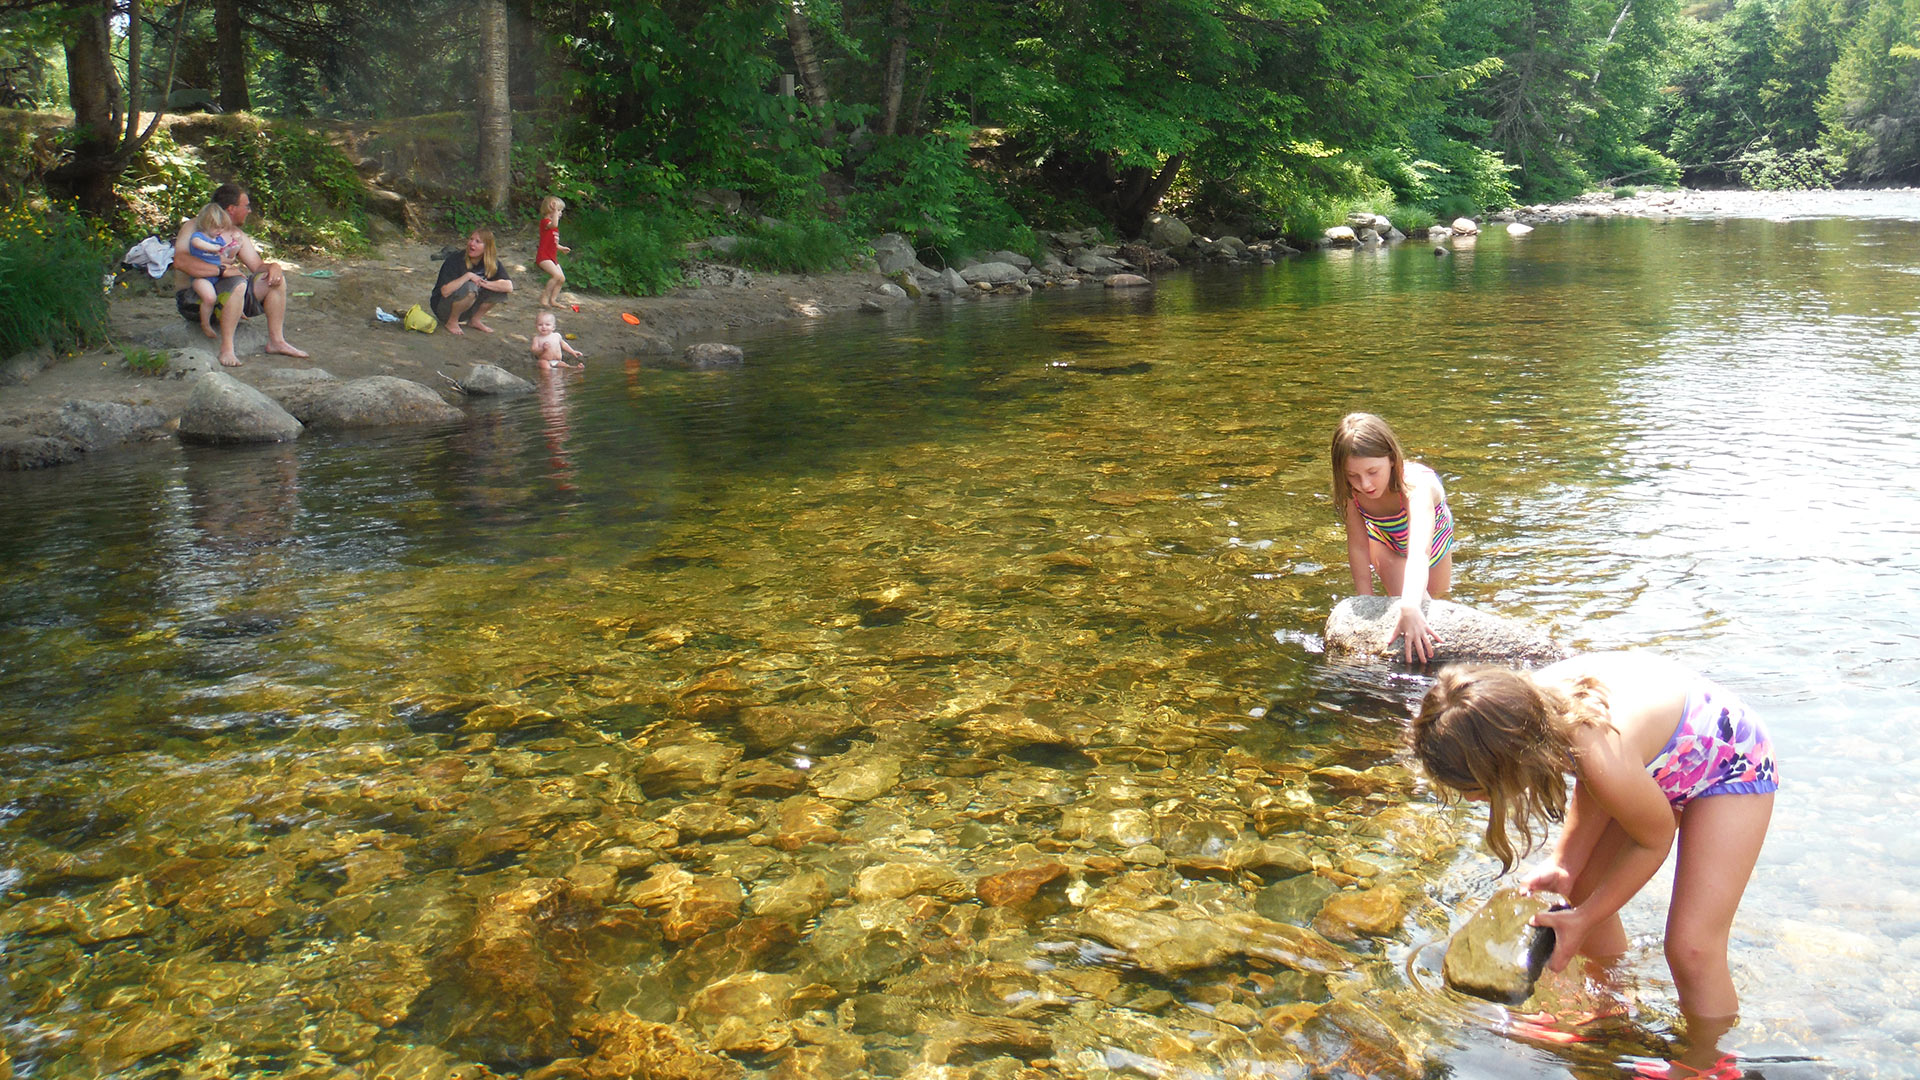 Exploring the brook at Scenic View Campground.